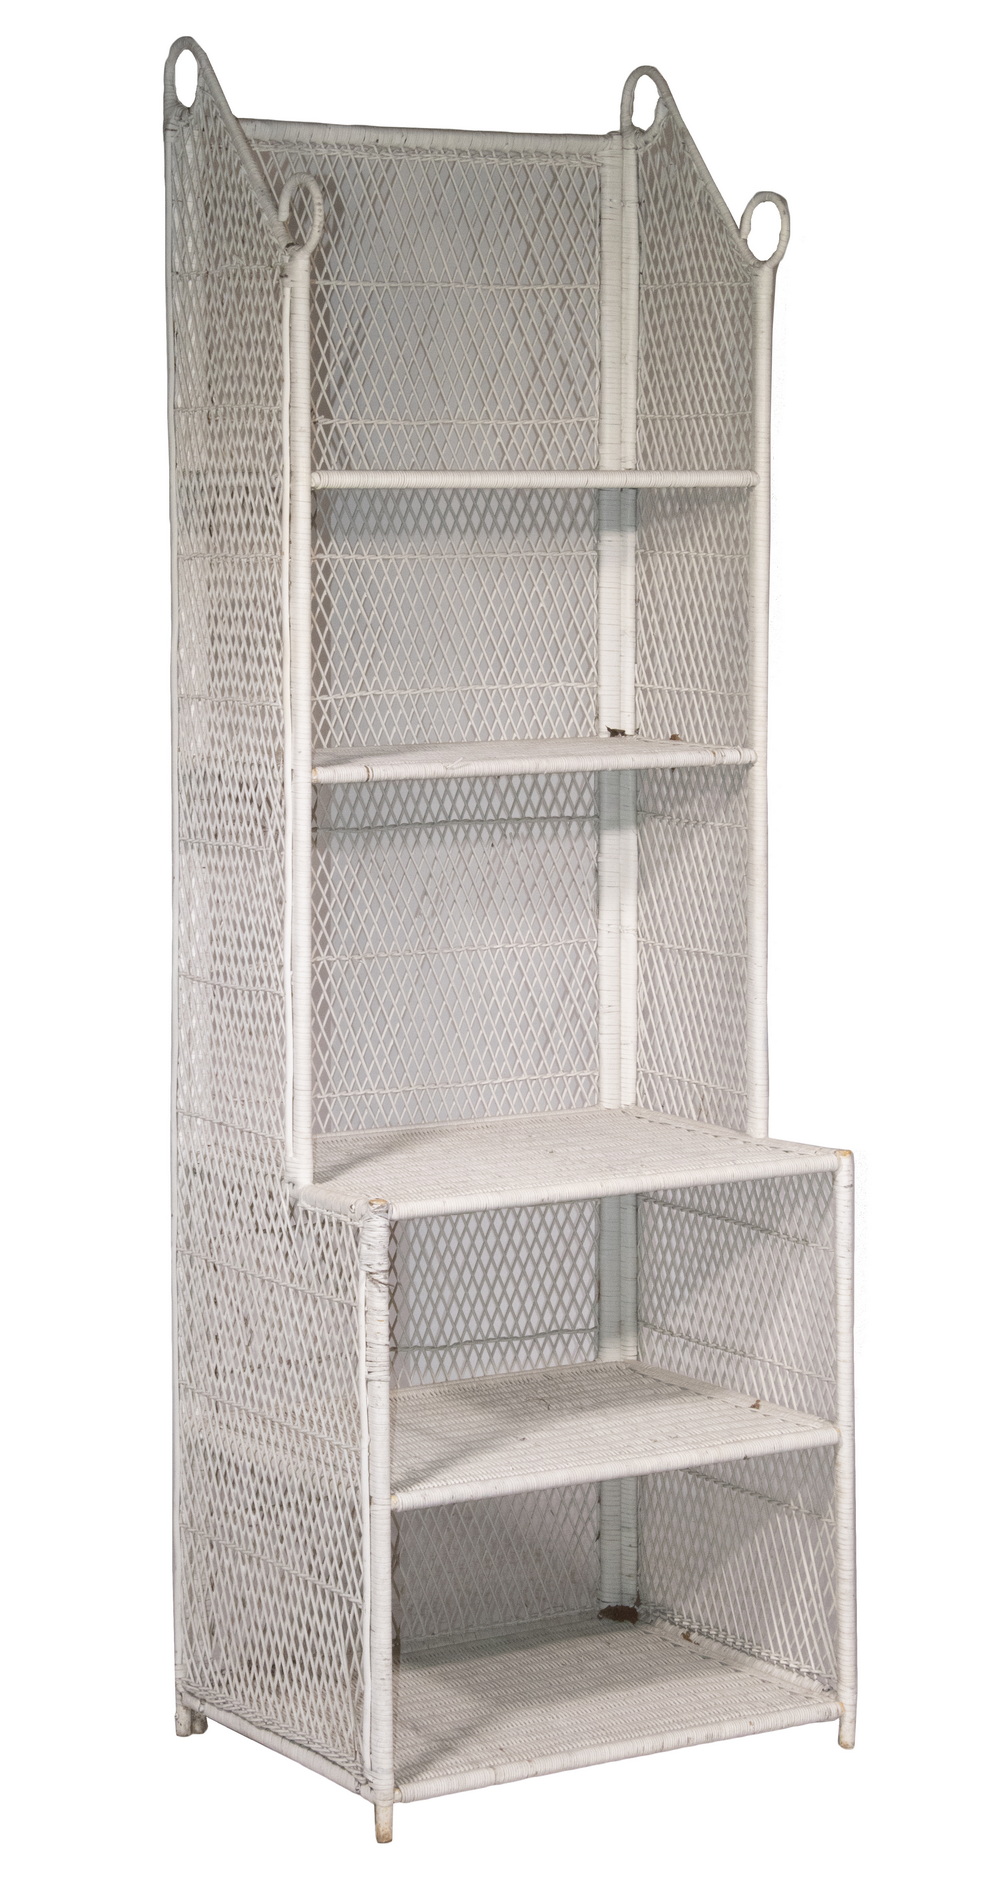 WICKER DISPLAY STAND Vintage White 302914